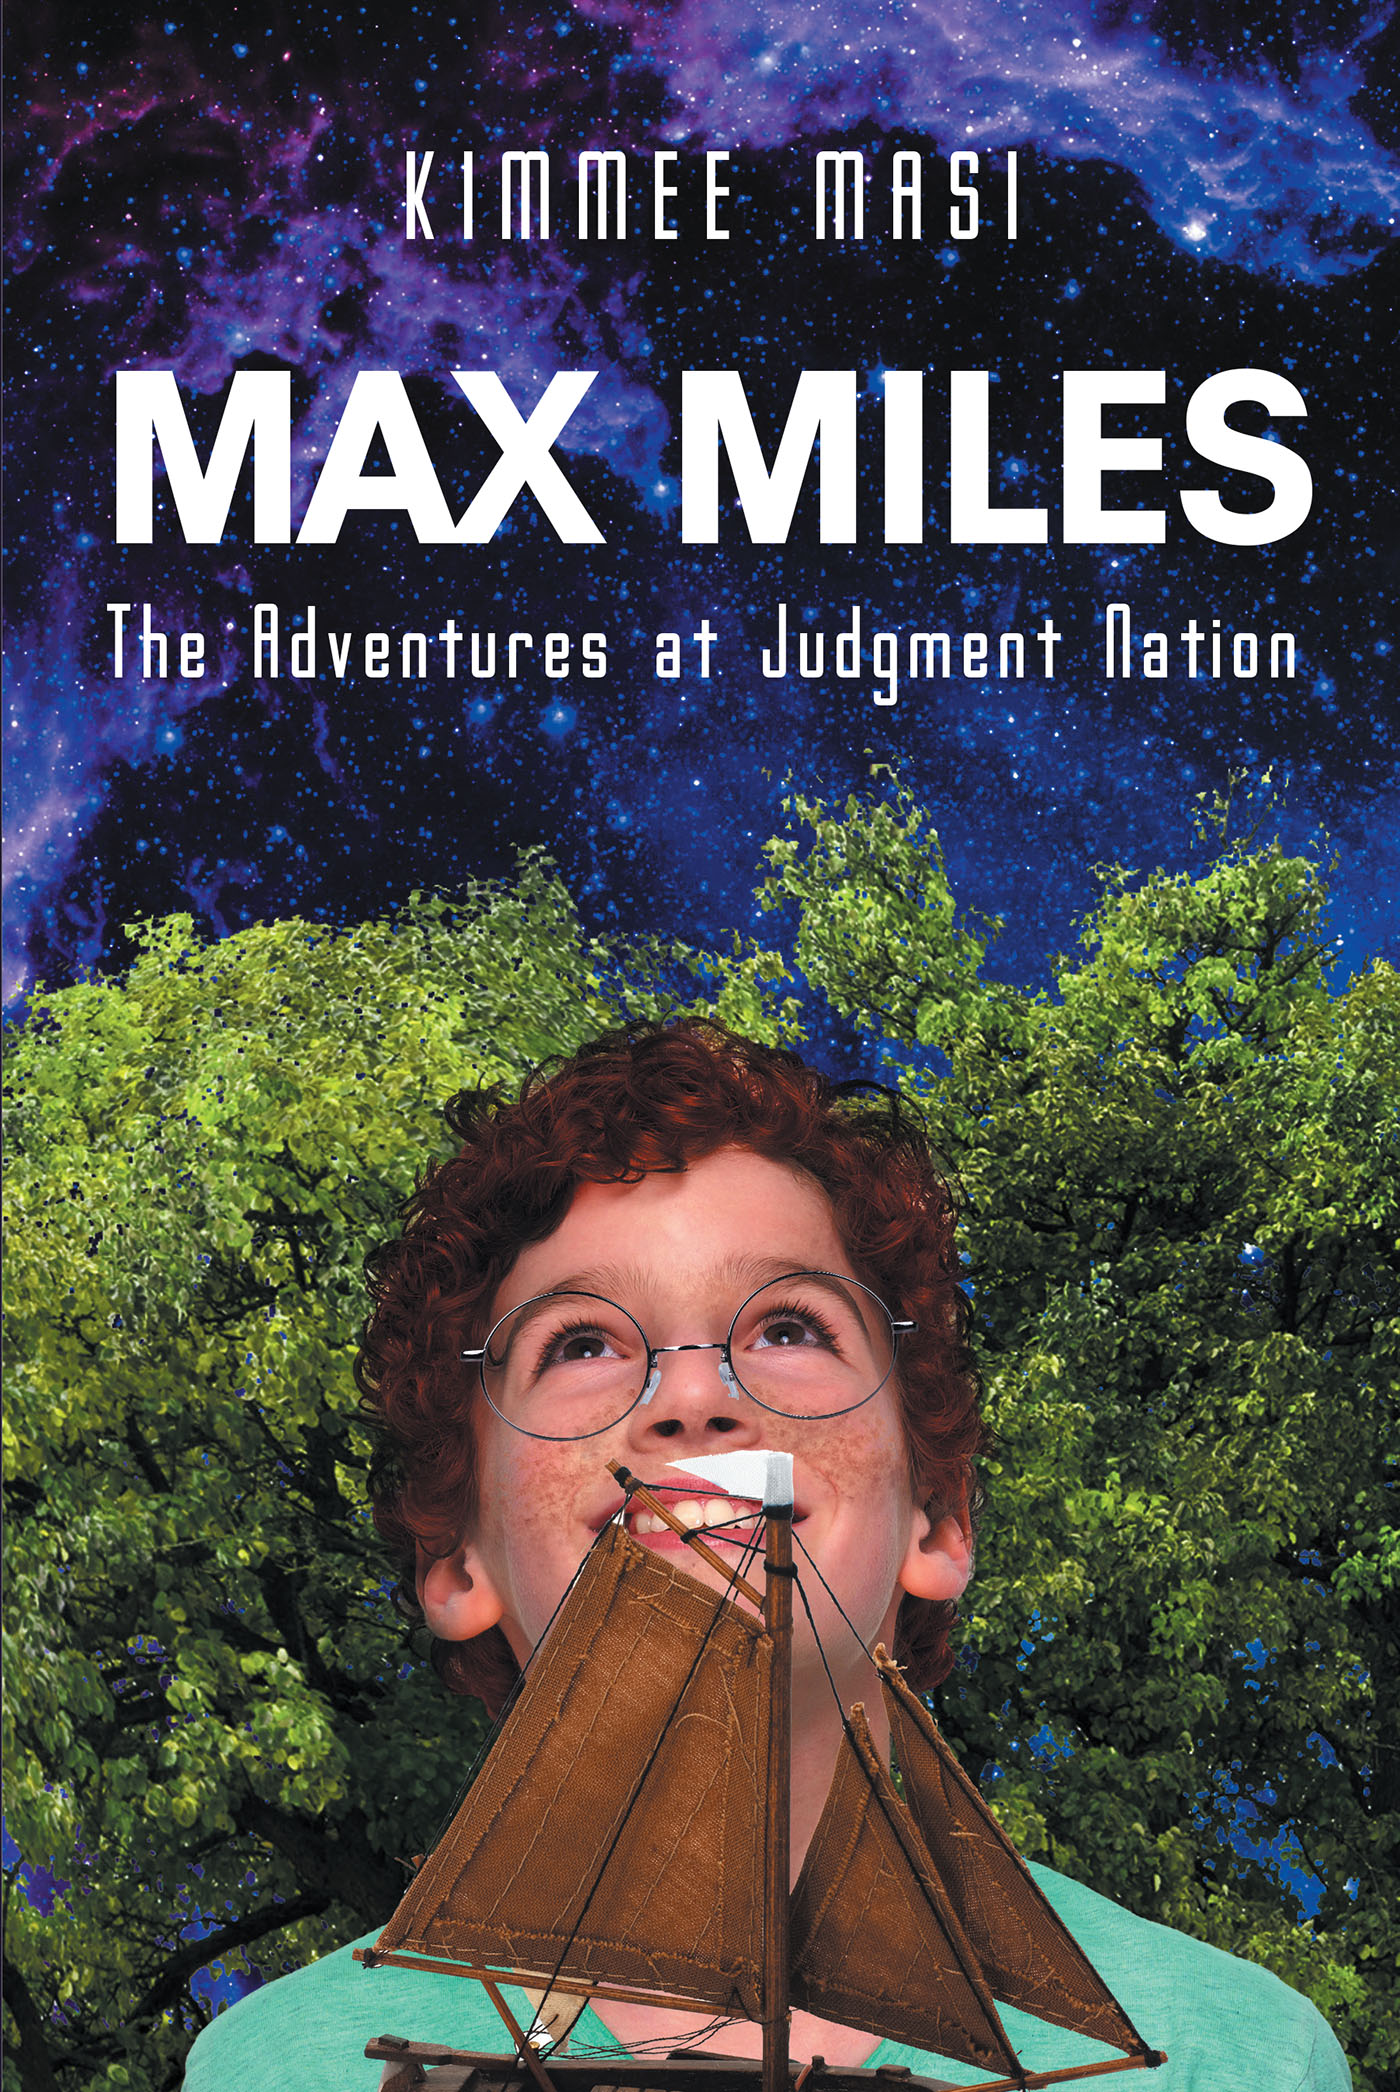 Author Kimmee Masi’s New Book, “Max Miles: The Adventures at Judgment Nation,” Introduces Max Miles, a Lanky Fifth Grader Who is a Victim of Childhood Bullying